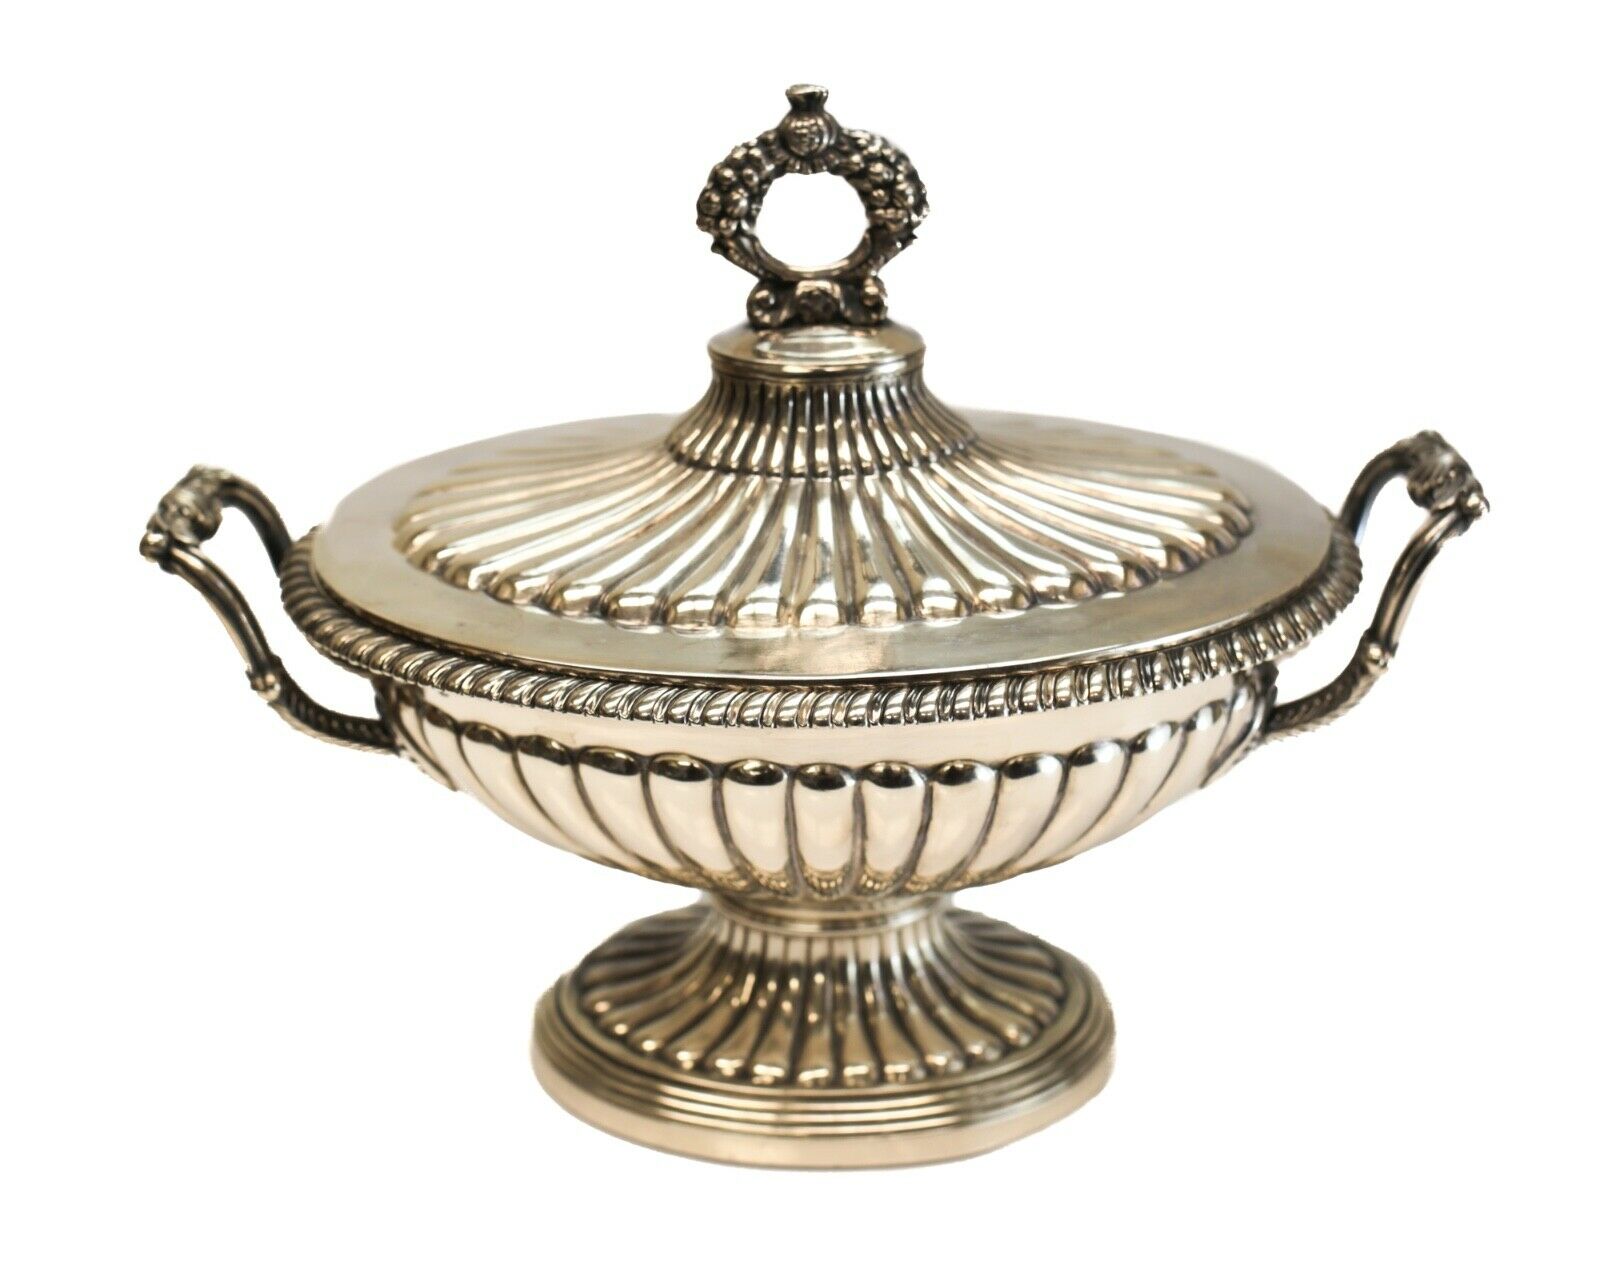 Charles-auguste Peret French Sterling Silver Footed Sauce Dish With Lid, C1860